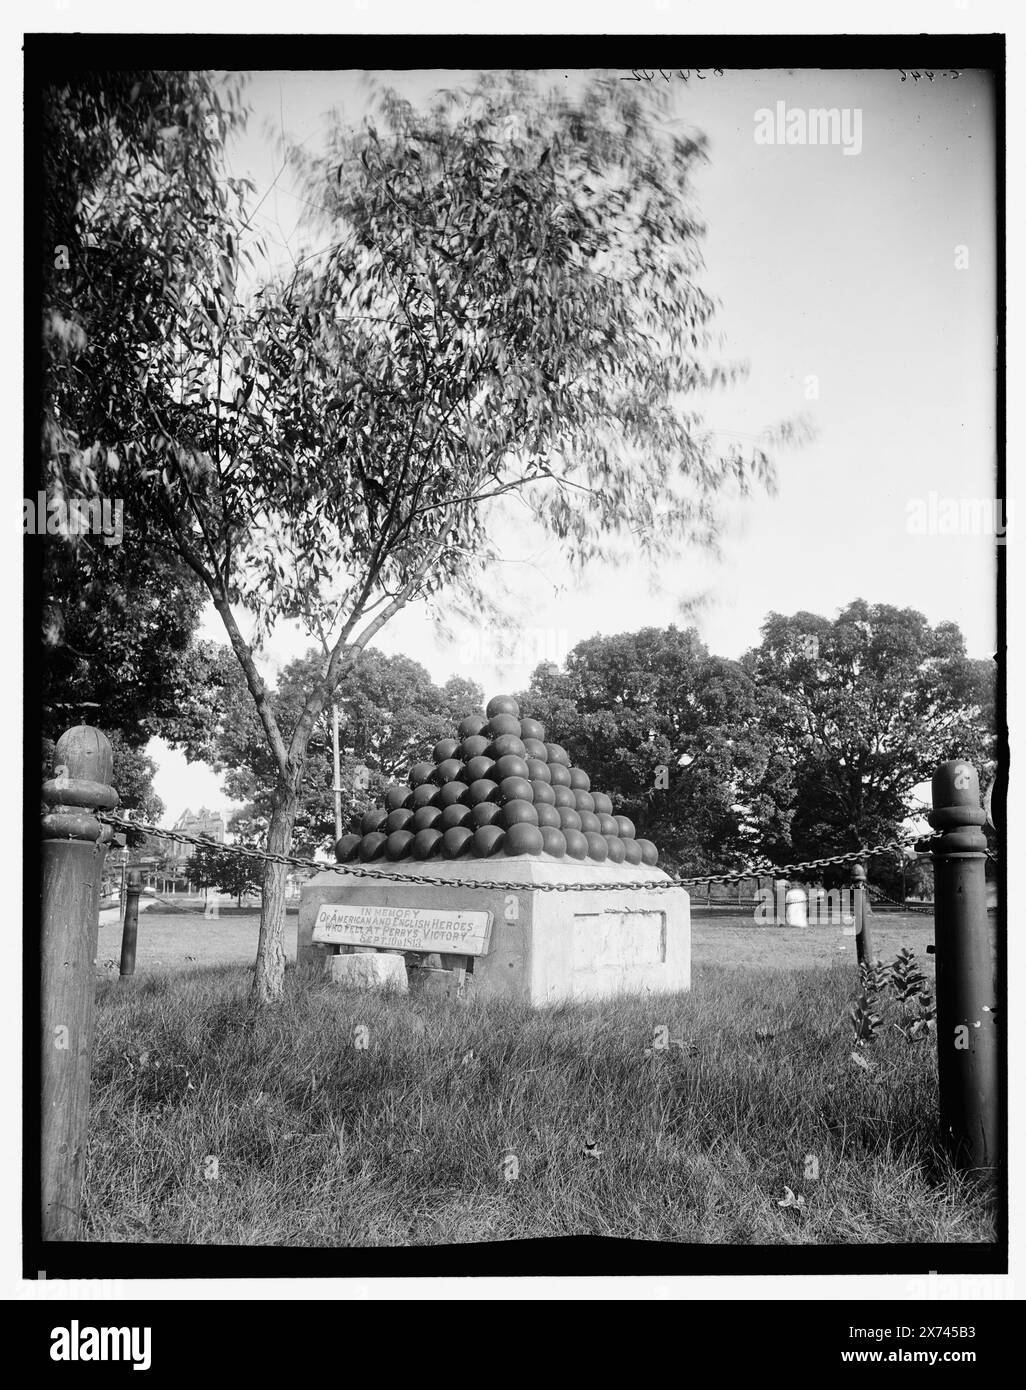 Cannonball monument, Put-In-Bay, Ohio, Title from jacket., 'C-446' on negative., Detroit Publishing Co. no. 034442., Gift; State Historical Society of Colorado; 1949,  Monuments & memorials. , Lake Erie, Battle of, 1813. , United States, Ohio, Put-In-Bay. Stock Photo